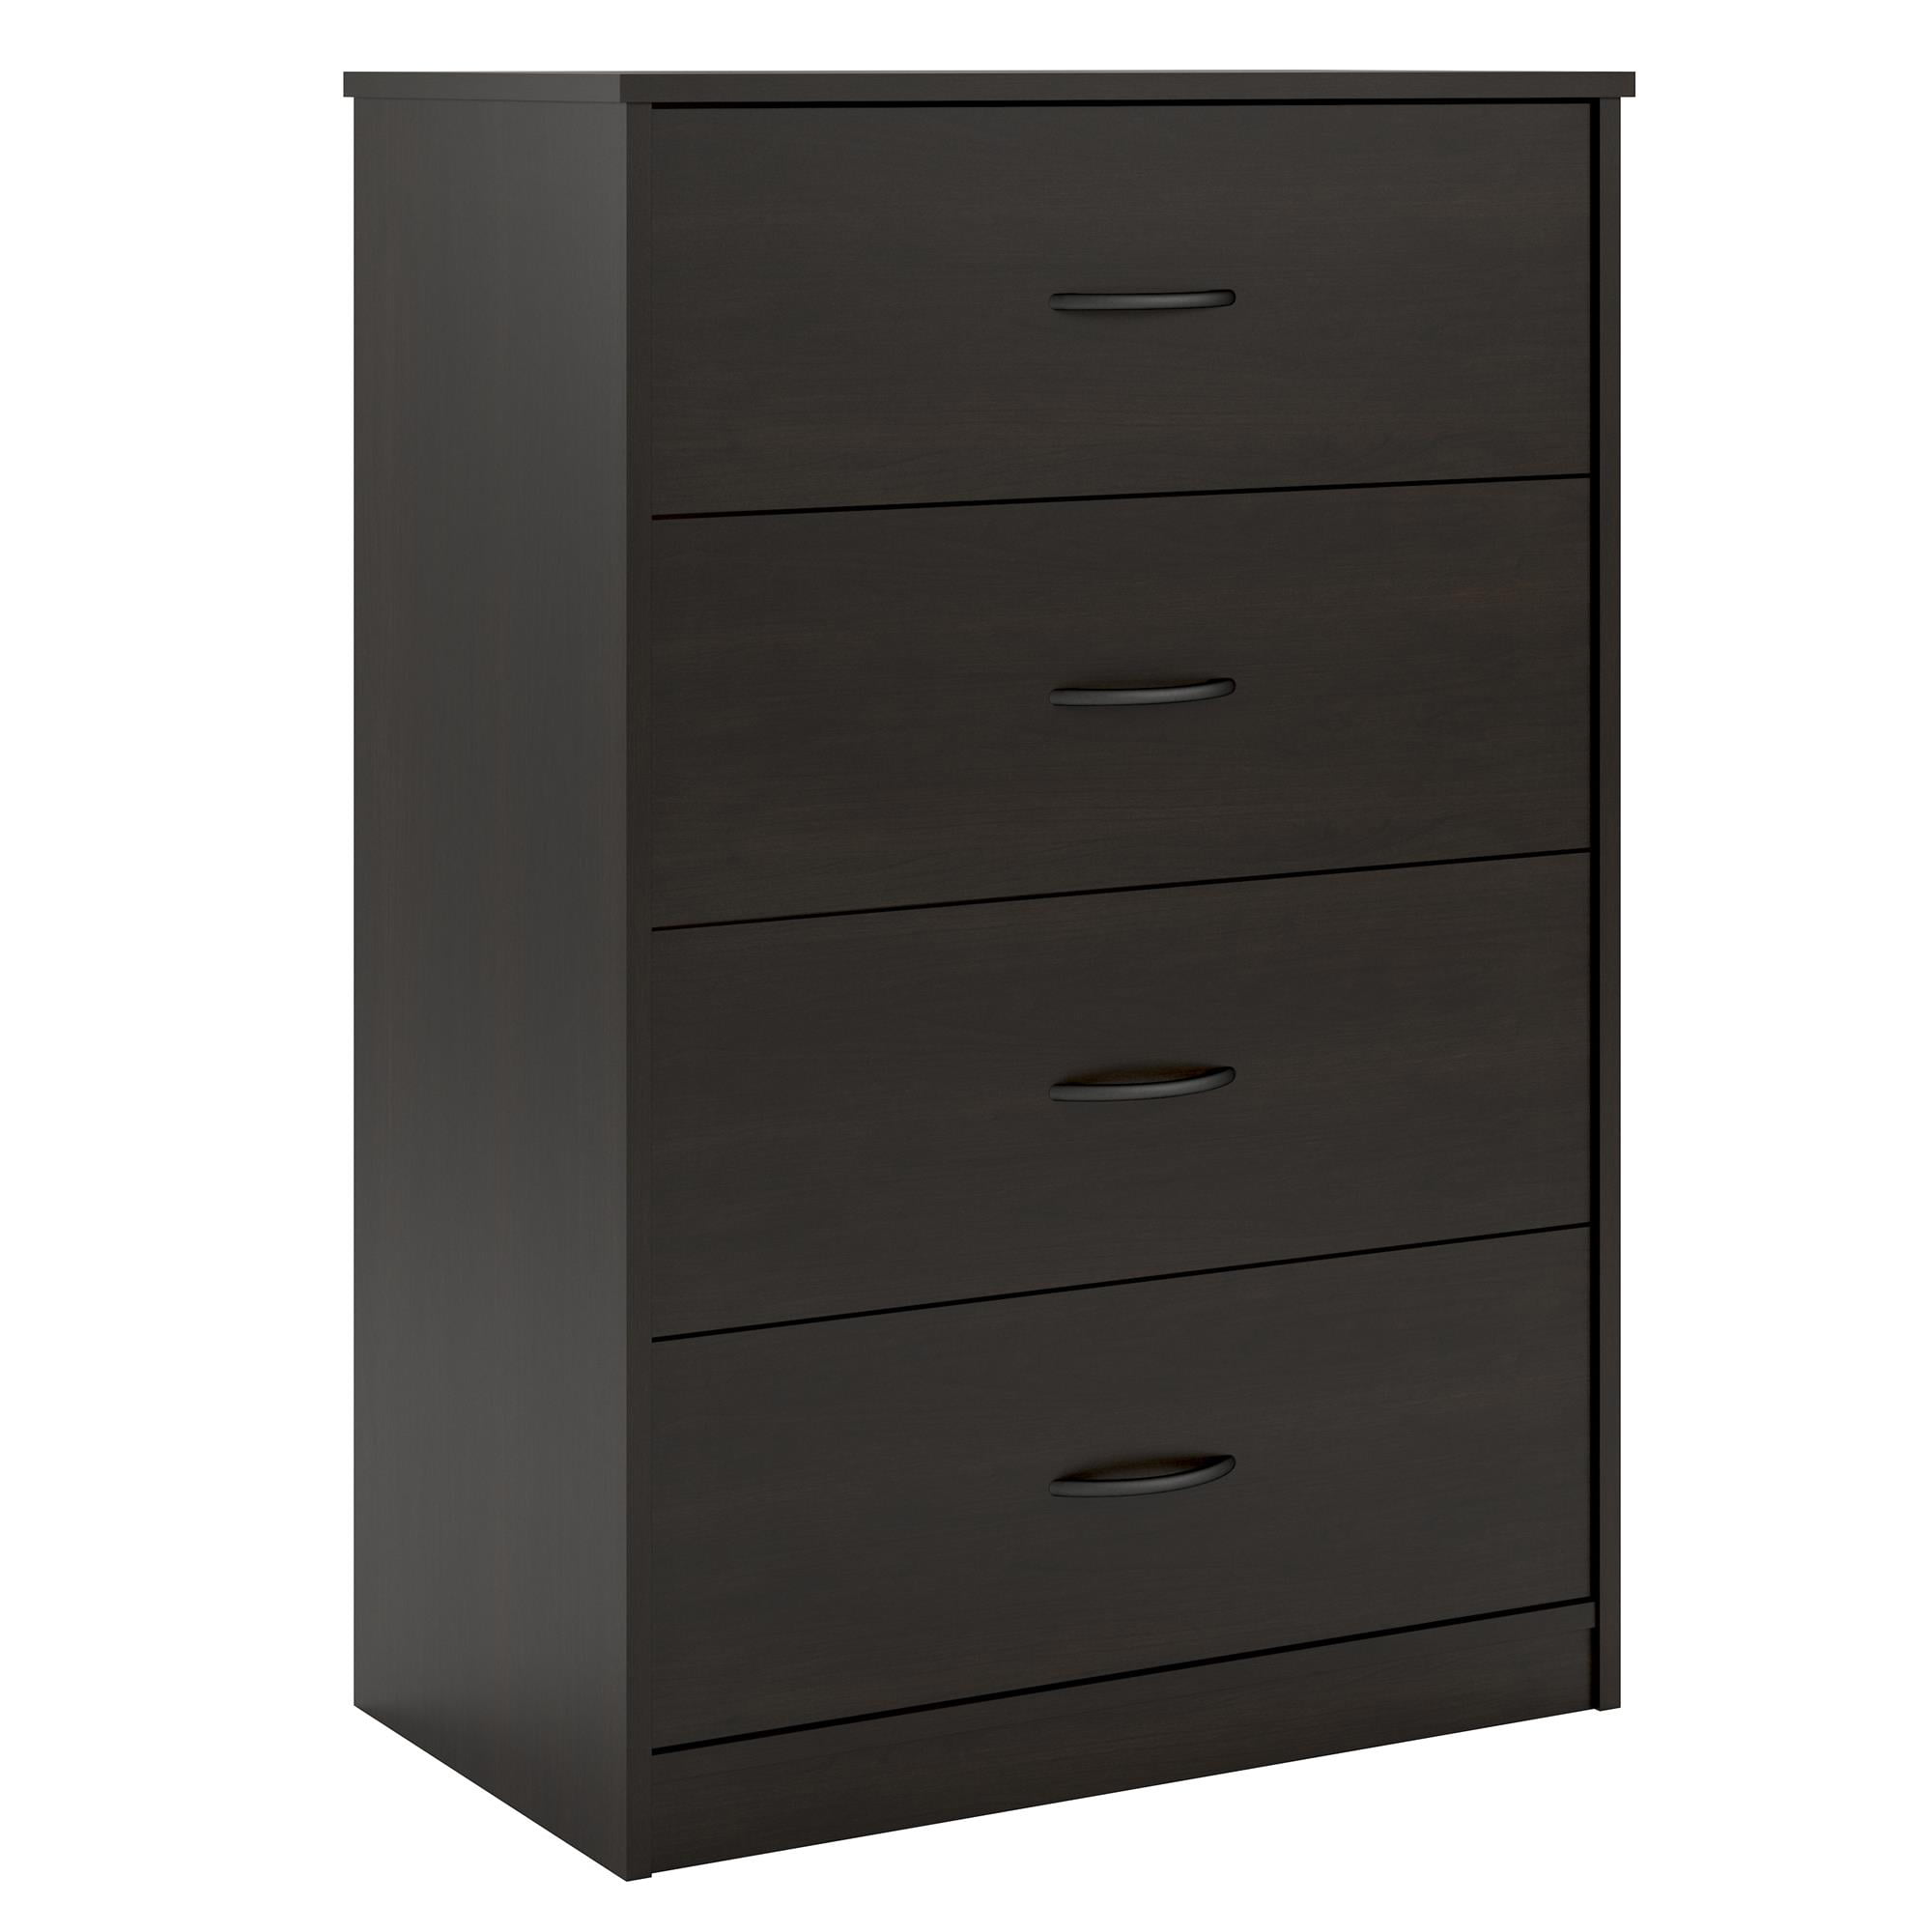 Details about   New Classic 4 Drawer Dresser for  additional storage 